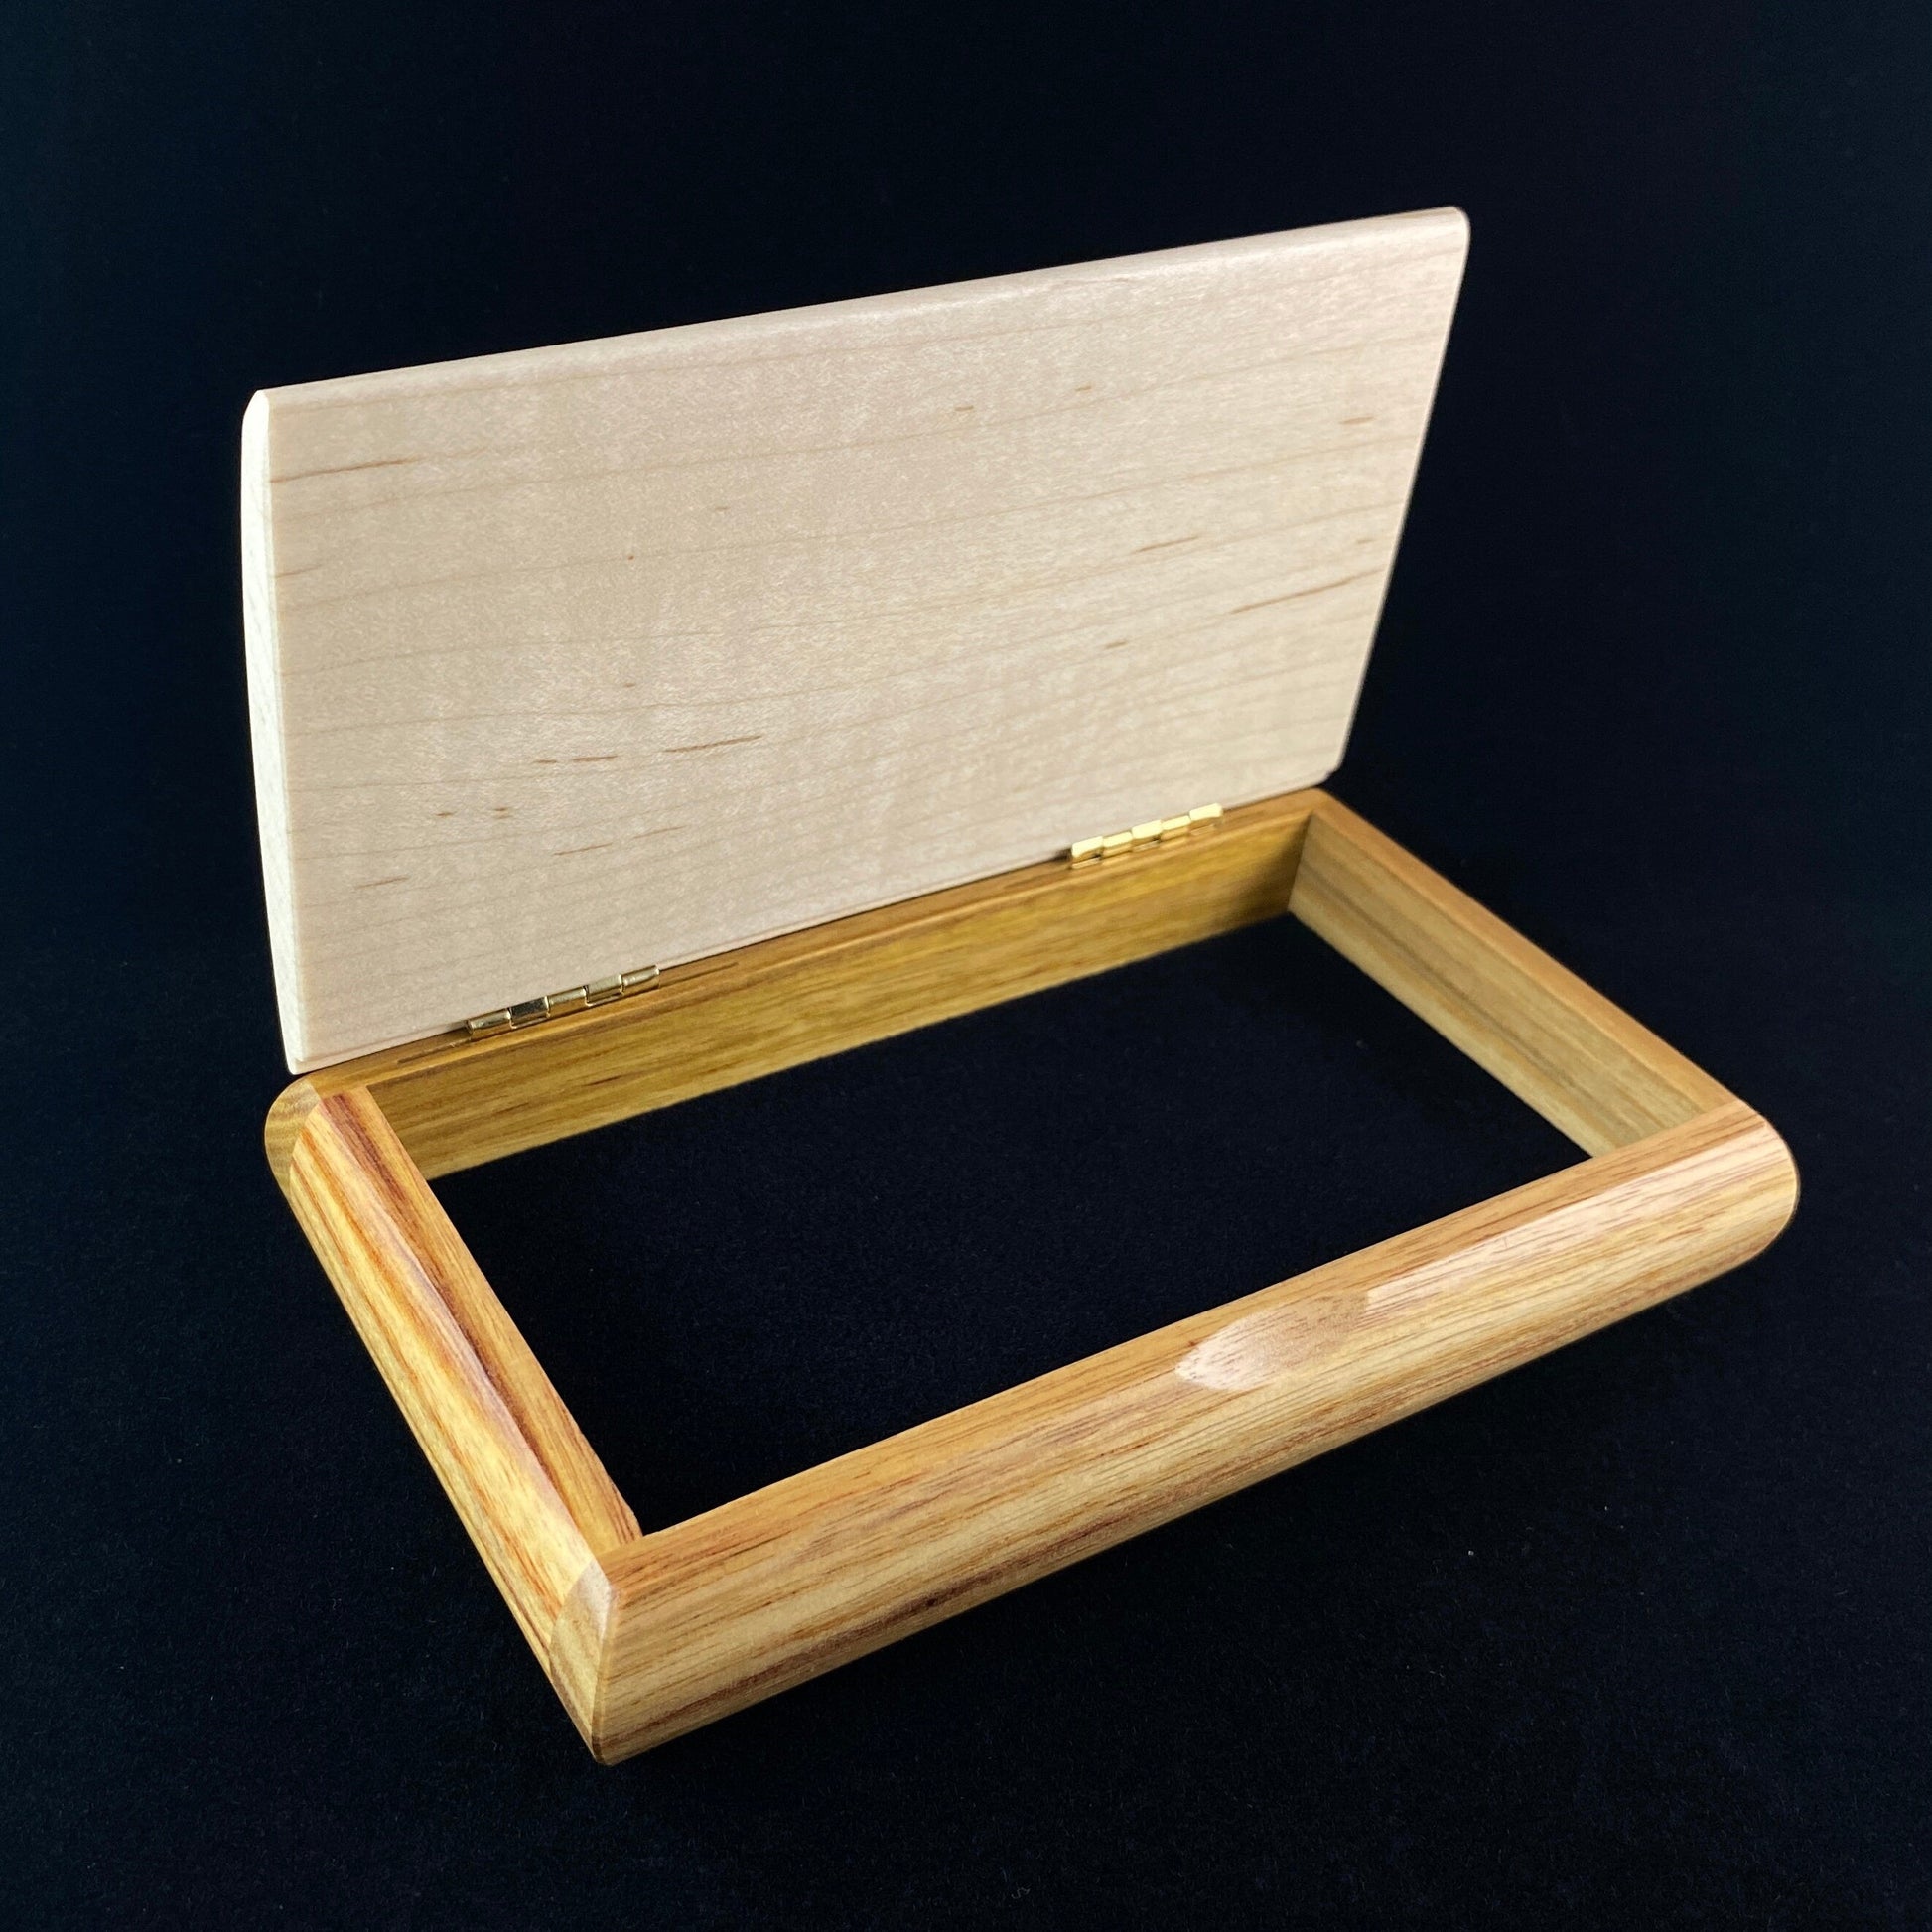 Life is Better Quote Box from Mikutowski Woodworking Handmade Wooden Box with Canarywood and Curly Maple